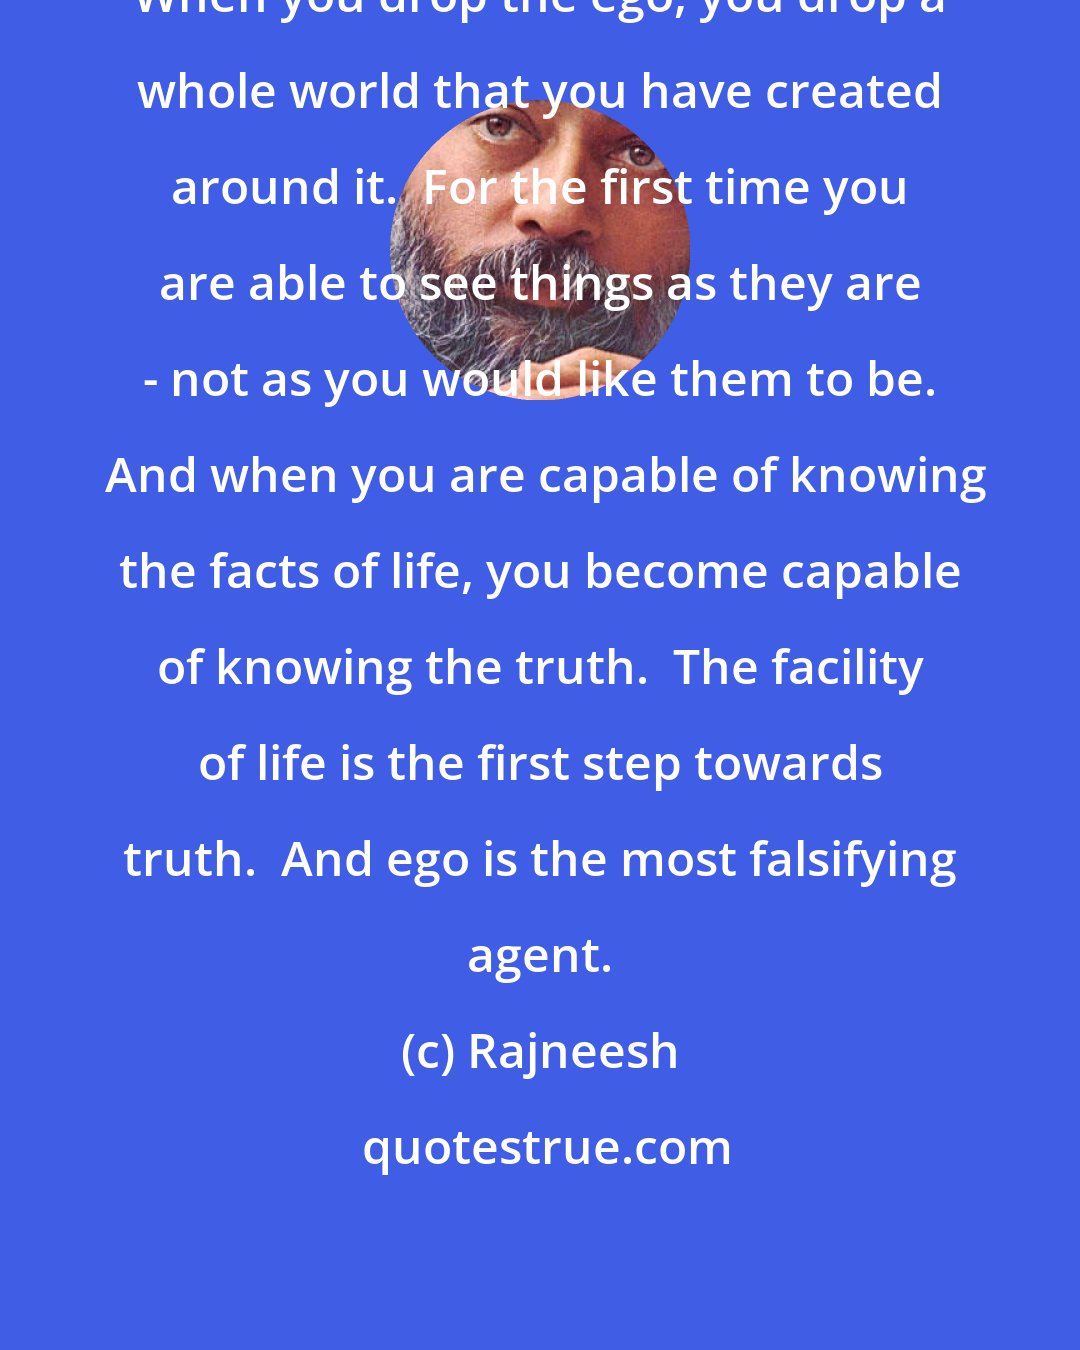 Rajneesh: When you drop the ego, you drop a whole world that you have created around it.  For the first time you are able to see things as they are - not as you would like them to be.  And when you are capable of knowing the facts of life, you become capable of knowing the truth.  The facility of life is the first step towards truth.  And ego is the most falsifying agent.